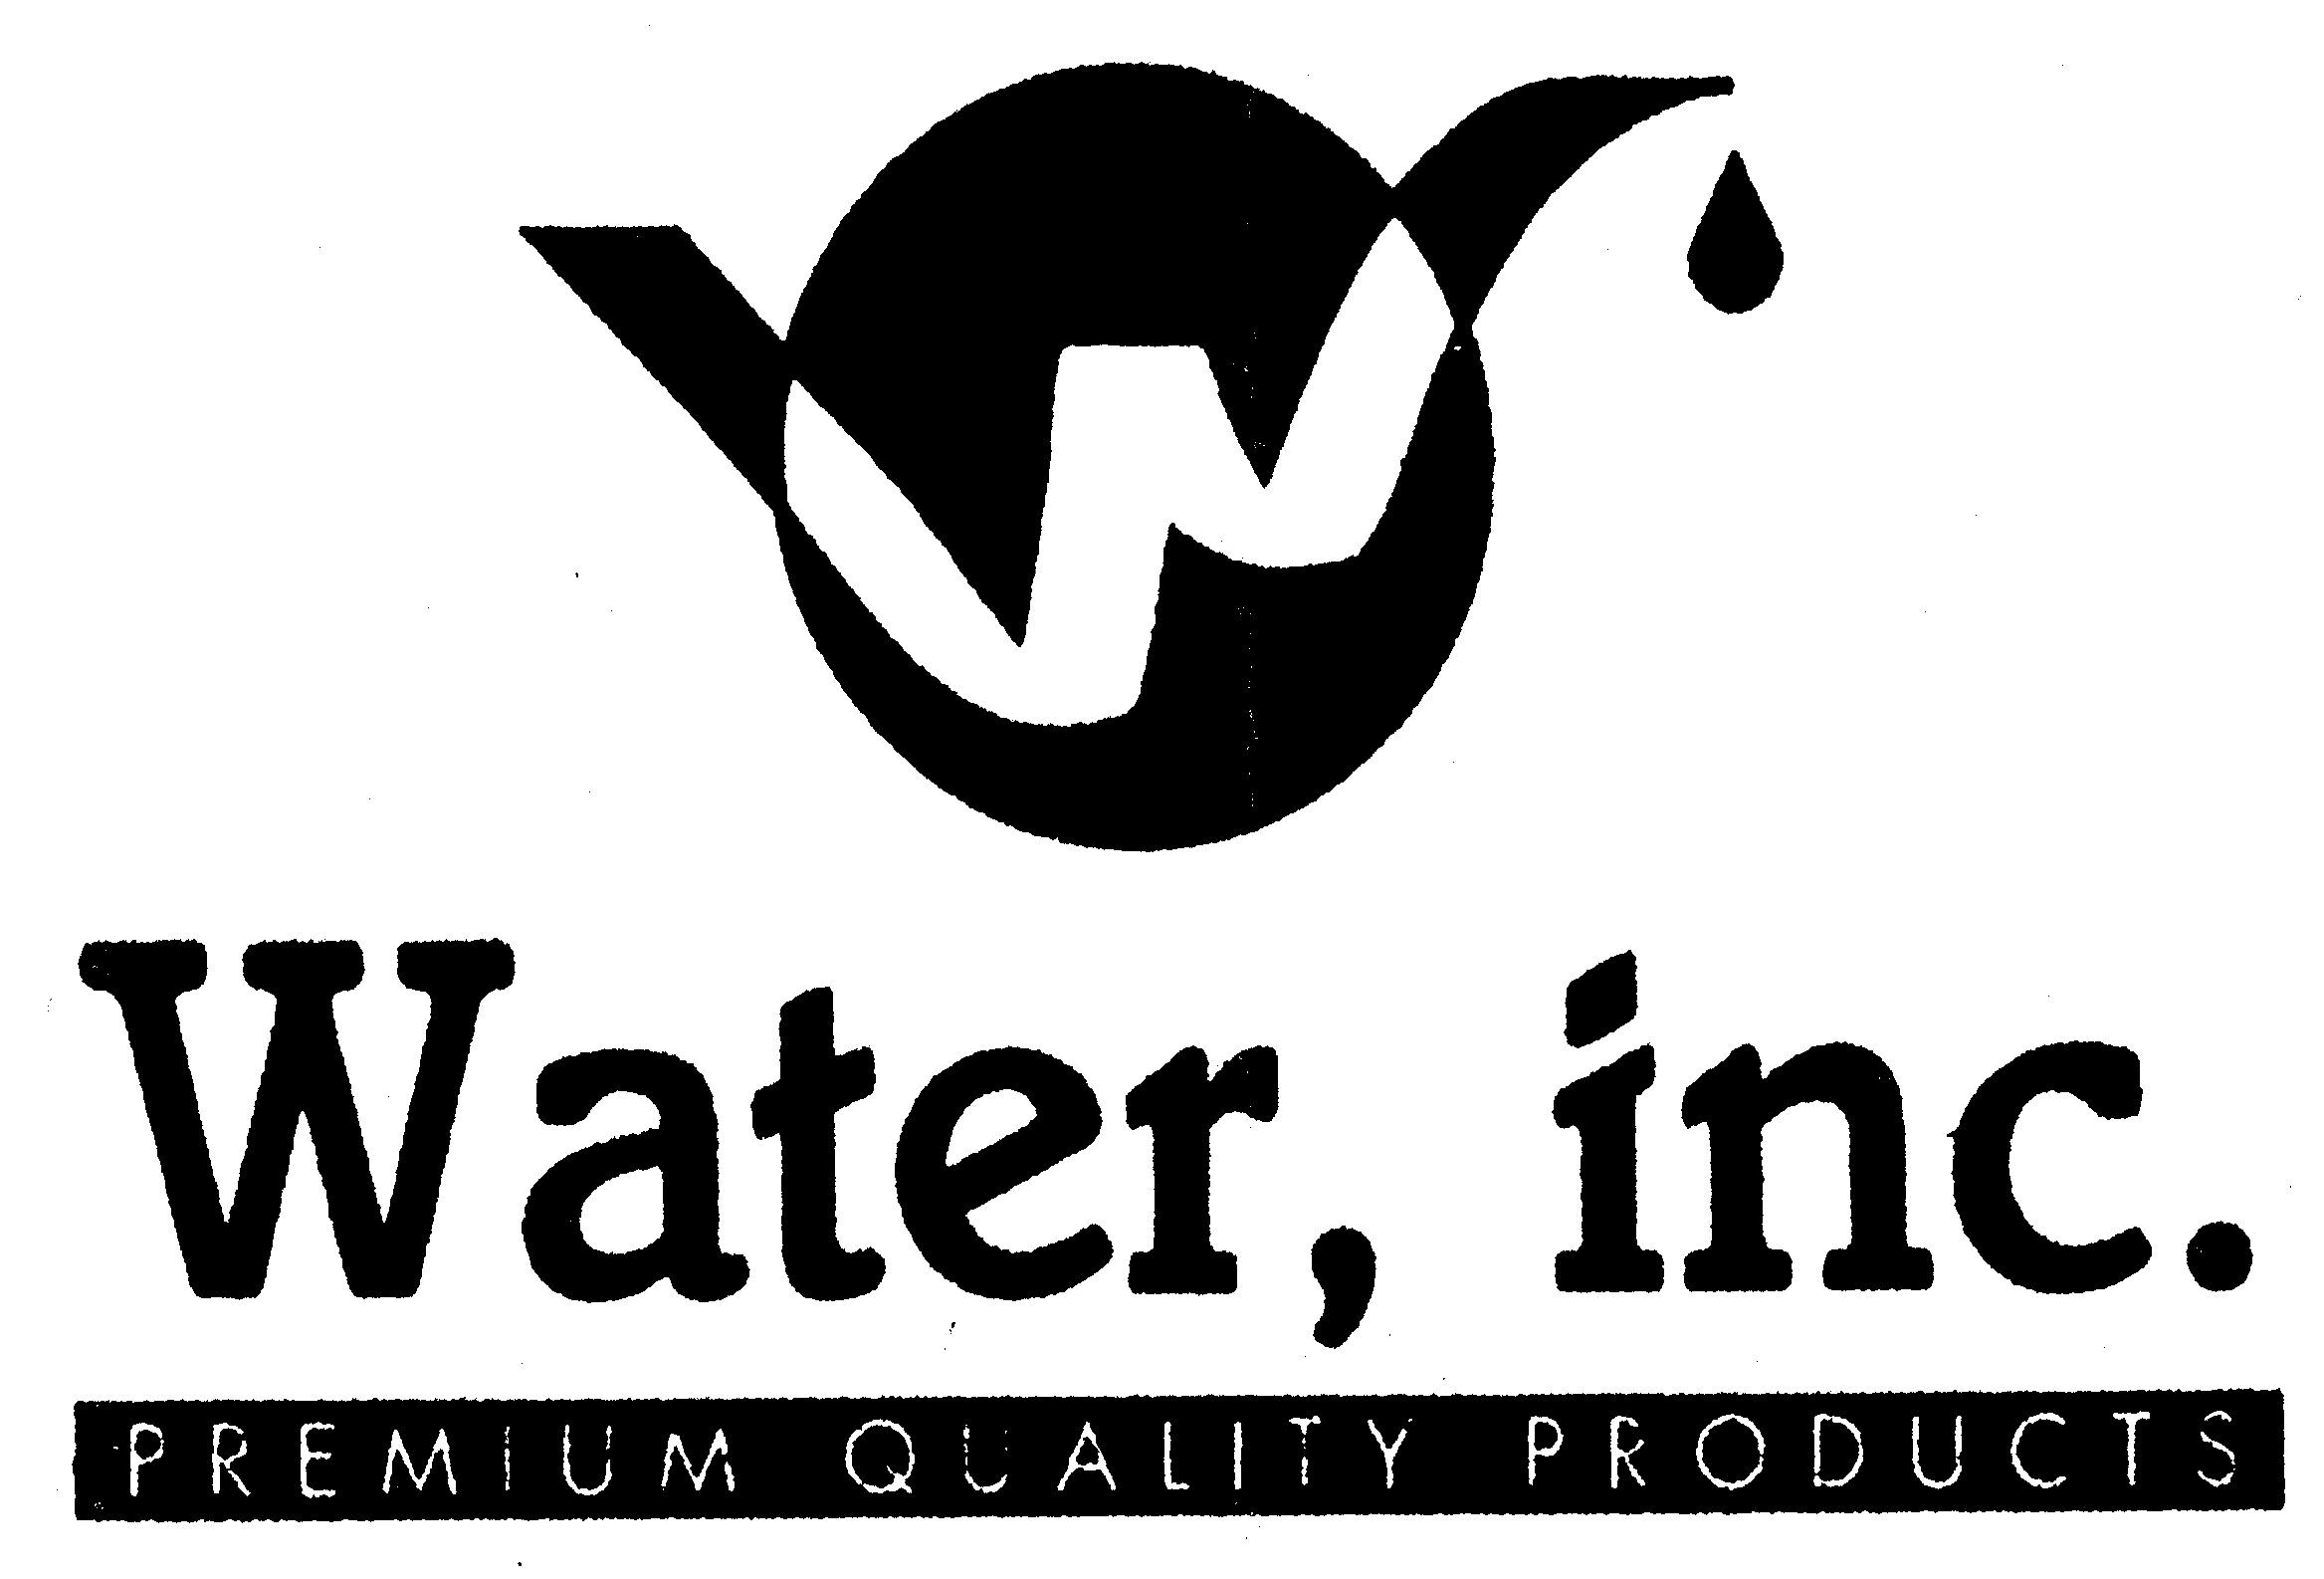  W WATER, INC. PREMIUM QUALITY PRODUCTS